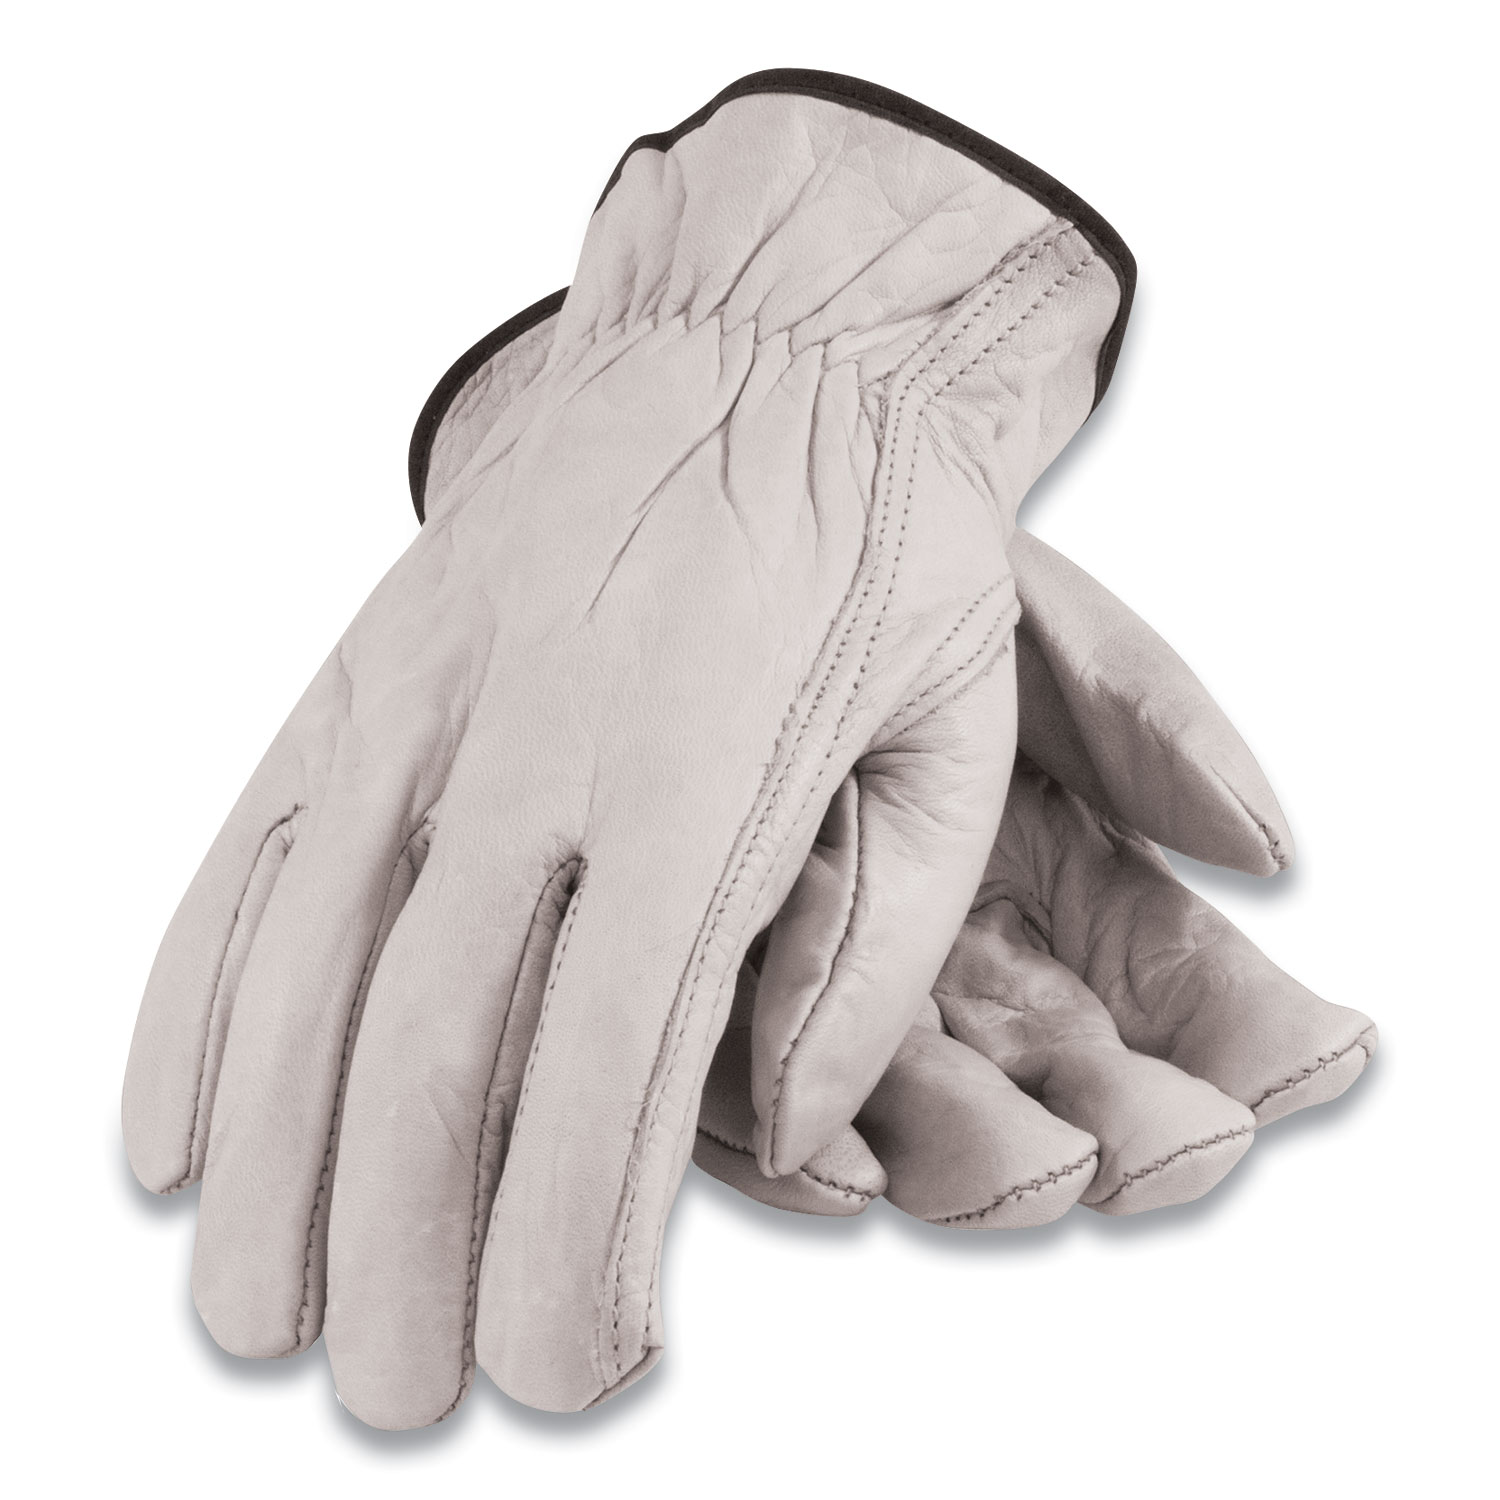 Image of Pip Economy Grade Top-Grain Cowhide Leather Work Gloves, X-Large, Tan